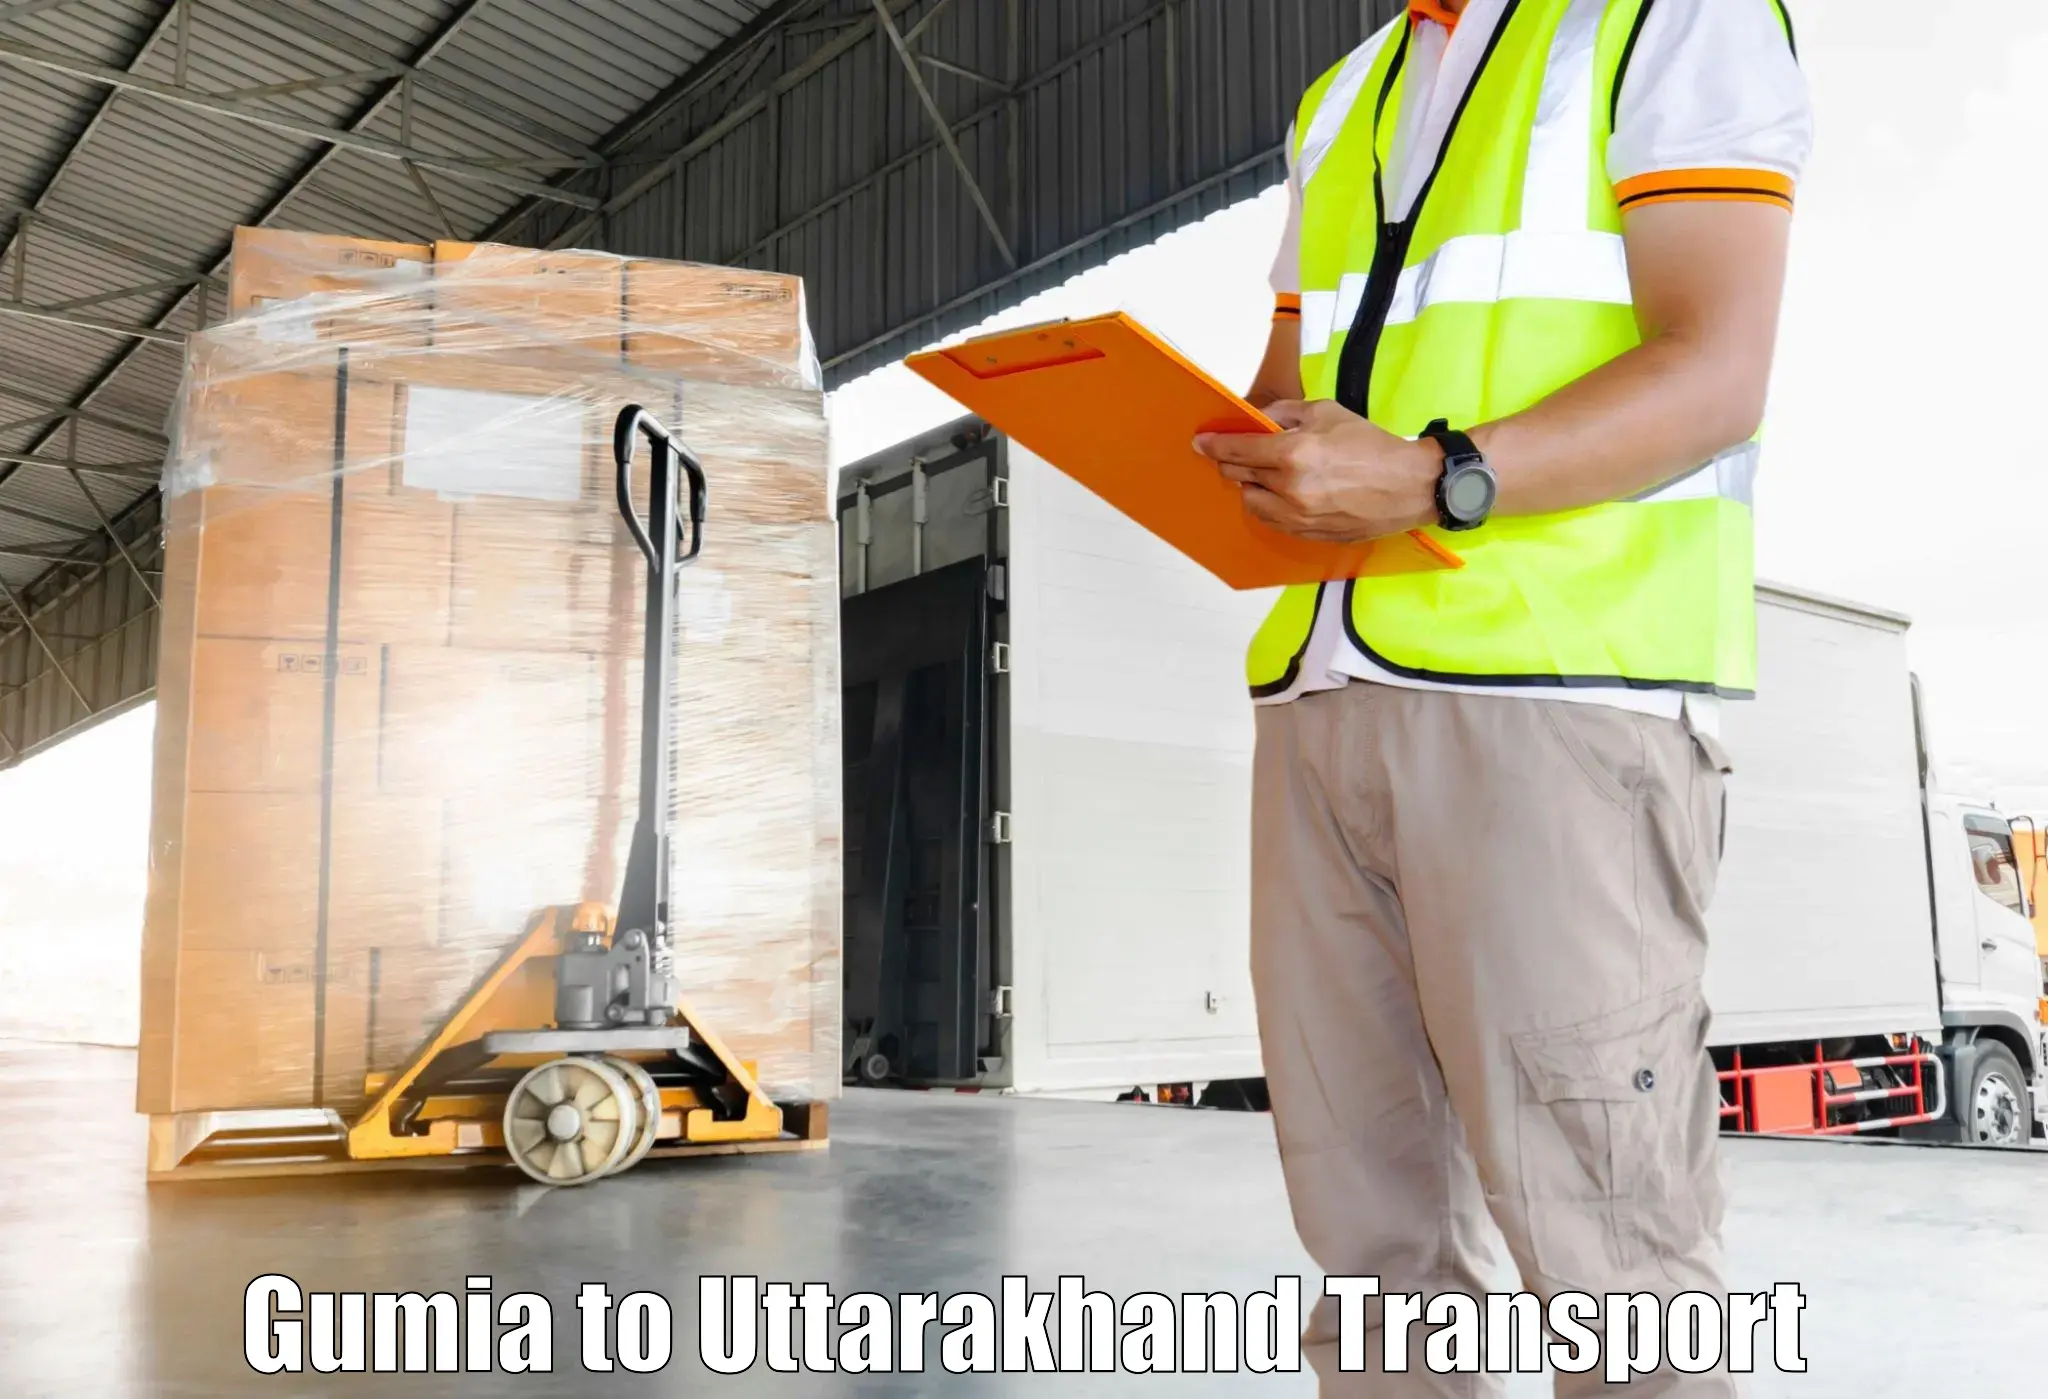 Truck transport companies in India Gumia to Doiwala